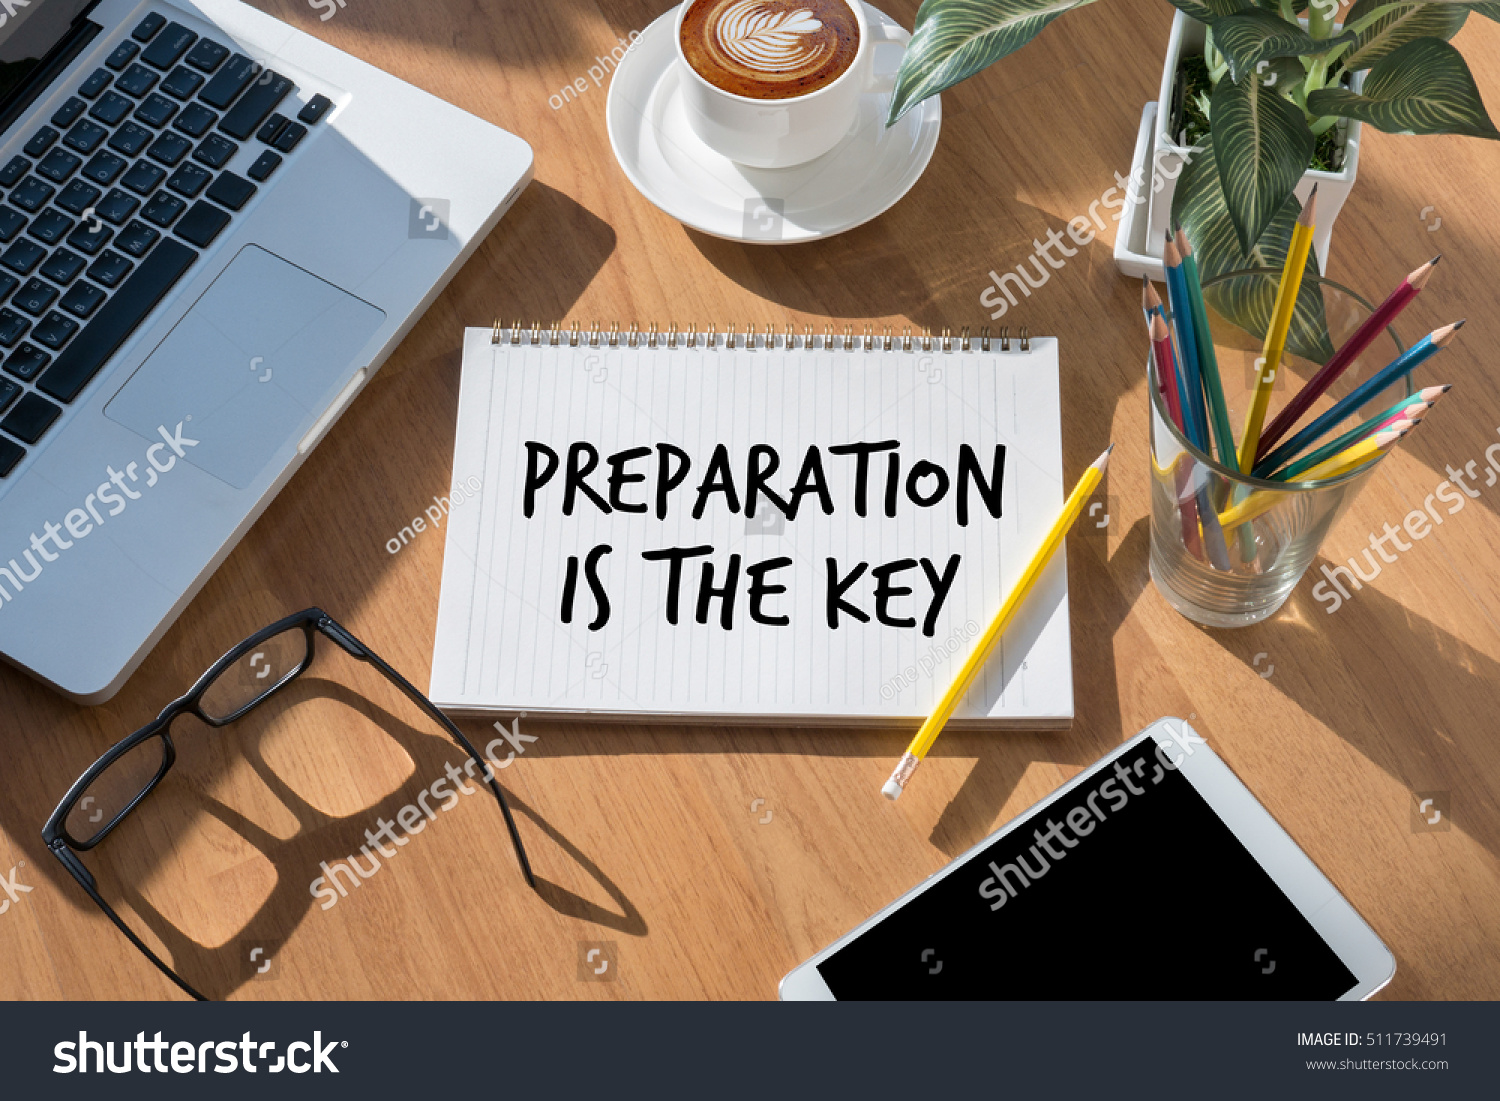 BE PREPARED and PREPARATION IS THE KEY  plan, prepare, perform #511739491